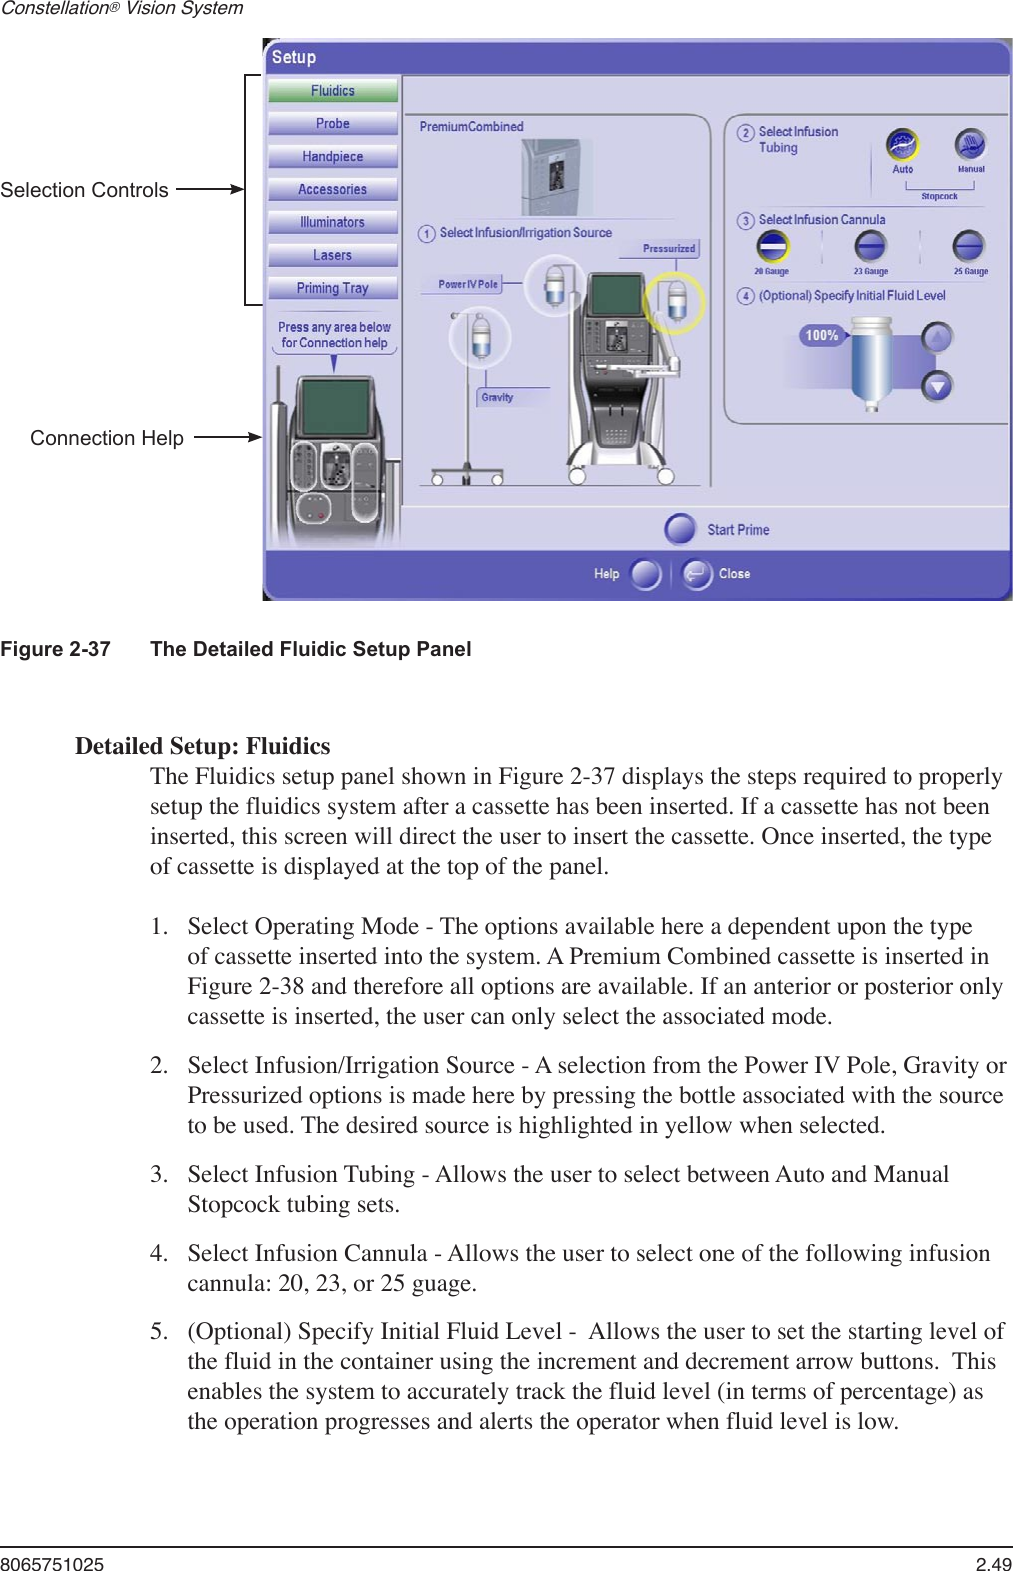 8065751025  2.49Constellation® Vision System Figure 2-37  The Detailed Fluidic Setup PanelDetailed Setup: FluidicsThe Fluidics setup panel shown in Figure 2-37 displays the steps required to properly setup the fluidics system after a cassette has been inserted. If a cassette has not been inserted, this screen will direct the user to insert the cassette. Once inserted, the type of cassette is displayed at the top of the panel.Select Operating Mode - The options available here a dependent upon the type of cassette inserted into the system. A Premium Combined cassette is inserted in Figure 2-38 and therefore all options are available. If an anterior or posterior only cassette is inserted, the user can only select the associated mode.Select Infusion/Irrigation Source - A selection from the Power IV Pole, Gravity or Pressurized options is made here by pressing the bottle associated with the source to be used. The desired source is highlighted in yellow when selected.Select Infusion Tubing - Allows the user to select between Auto and Manual Stopcock tubing sets.Select Infusion Cannula - Allows the user to select one of the following infusion cannula: 20, 23, or 25 guage.(Optional) Specify Initial Fluid Level -  Allows the user to set the starting level of the fluid in the container using the increment and decrement arrow buttons.  This enables the system to accurately track the fluid level (in terms of percentage) as the operation progresses and alerts the operator when fluid level is low.1.2.3.4.5.Selection ControlsConnection Help